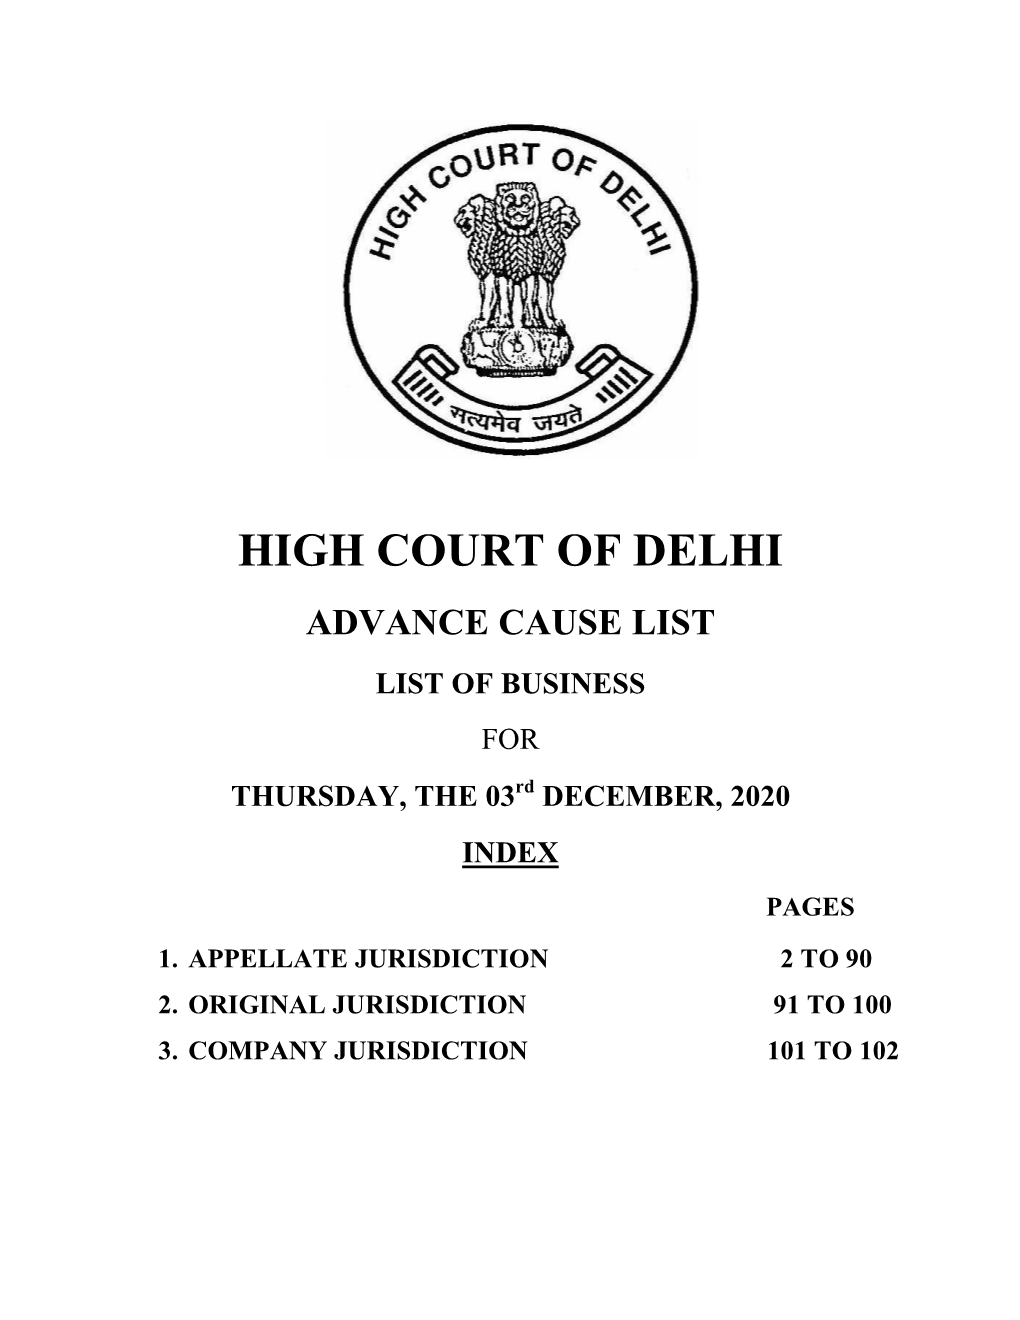 HIGH COURT of DELHI ADVANCE CAUSE LIST LIST of BUSINESS for THURSDAY, the 03Rd DECEMBER, 2020 INDEX PAGES